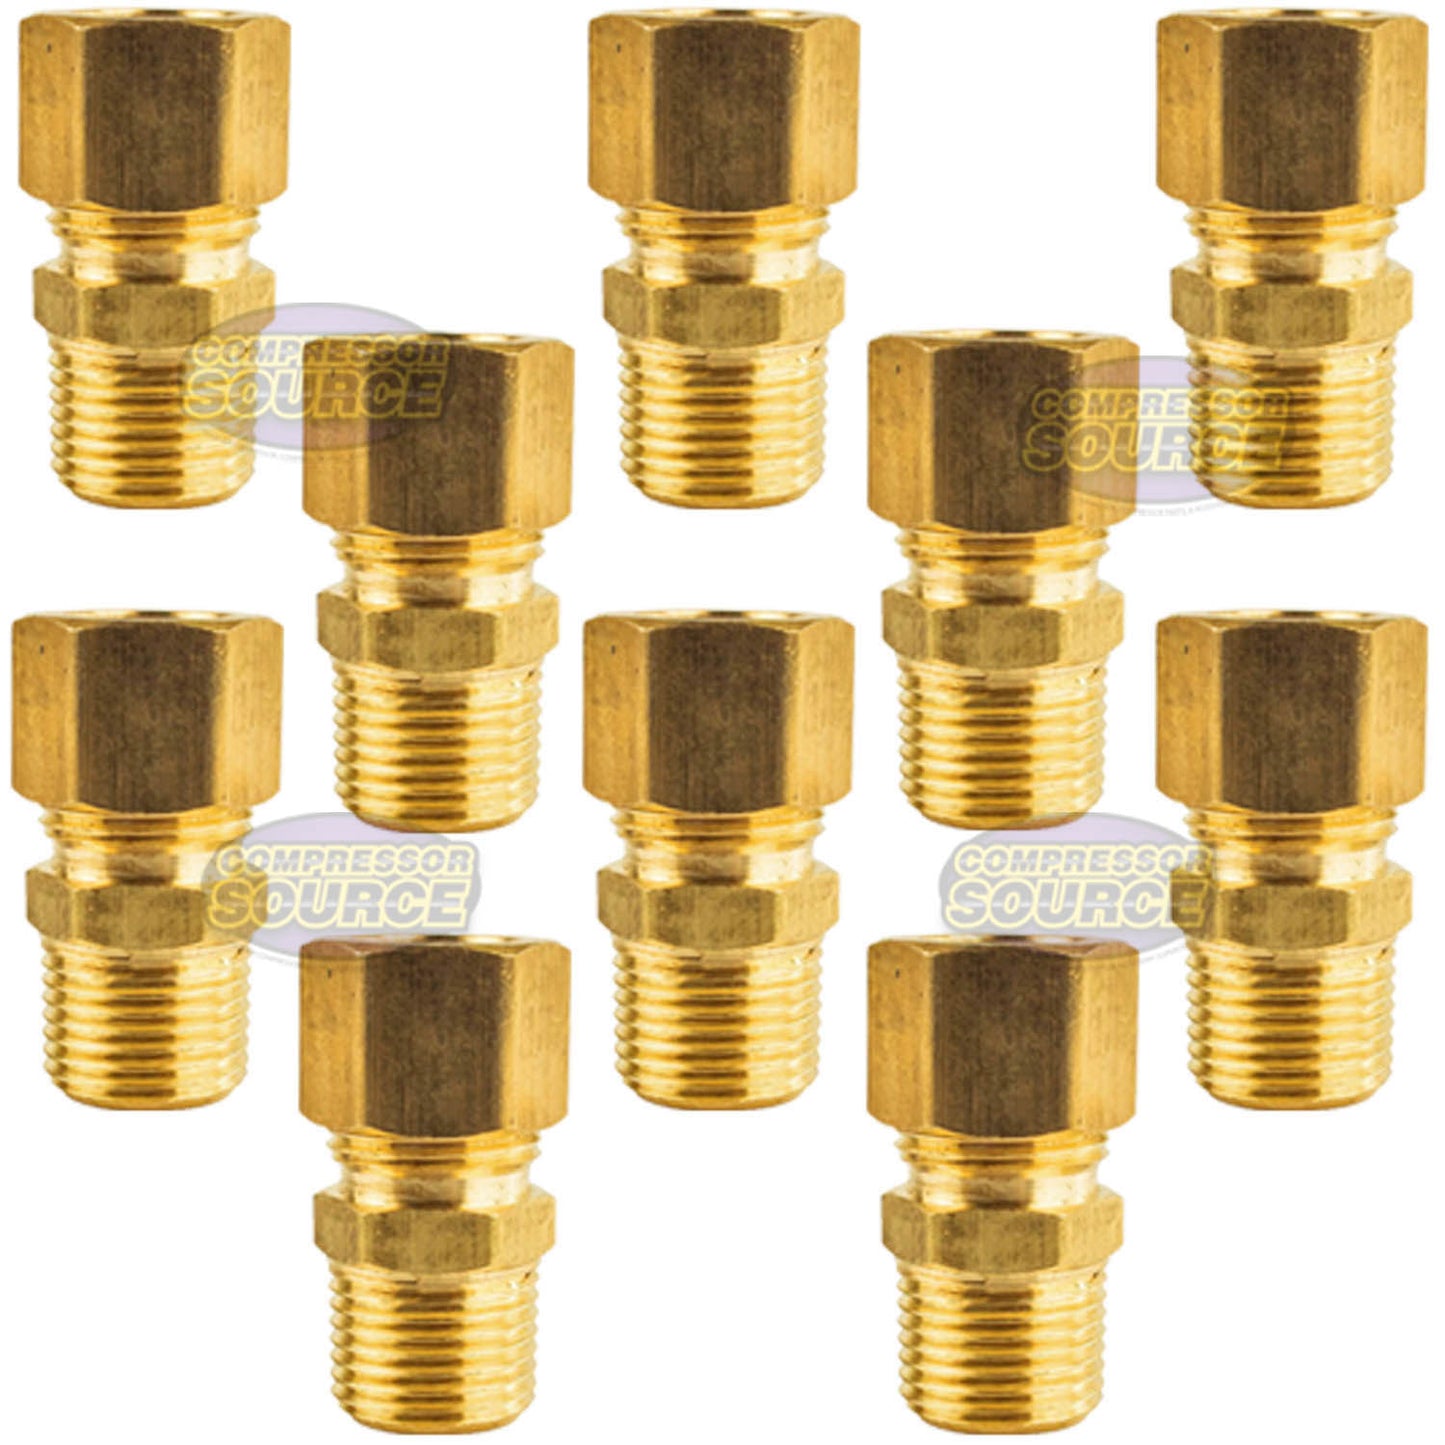 10 Pack 1/2" x 3/8" Male NPT Connector Brass Compression Fitting for 1/2 OD Tube